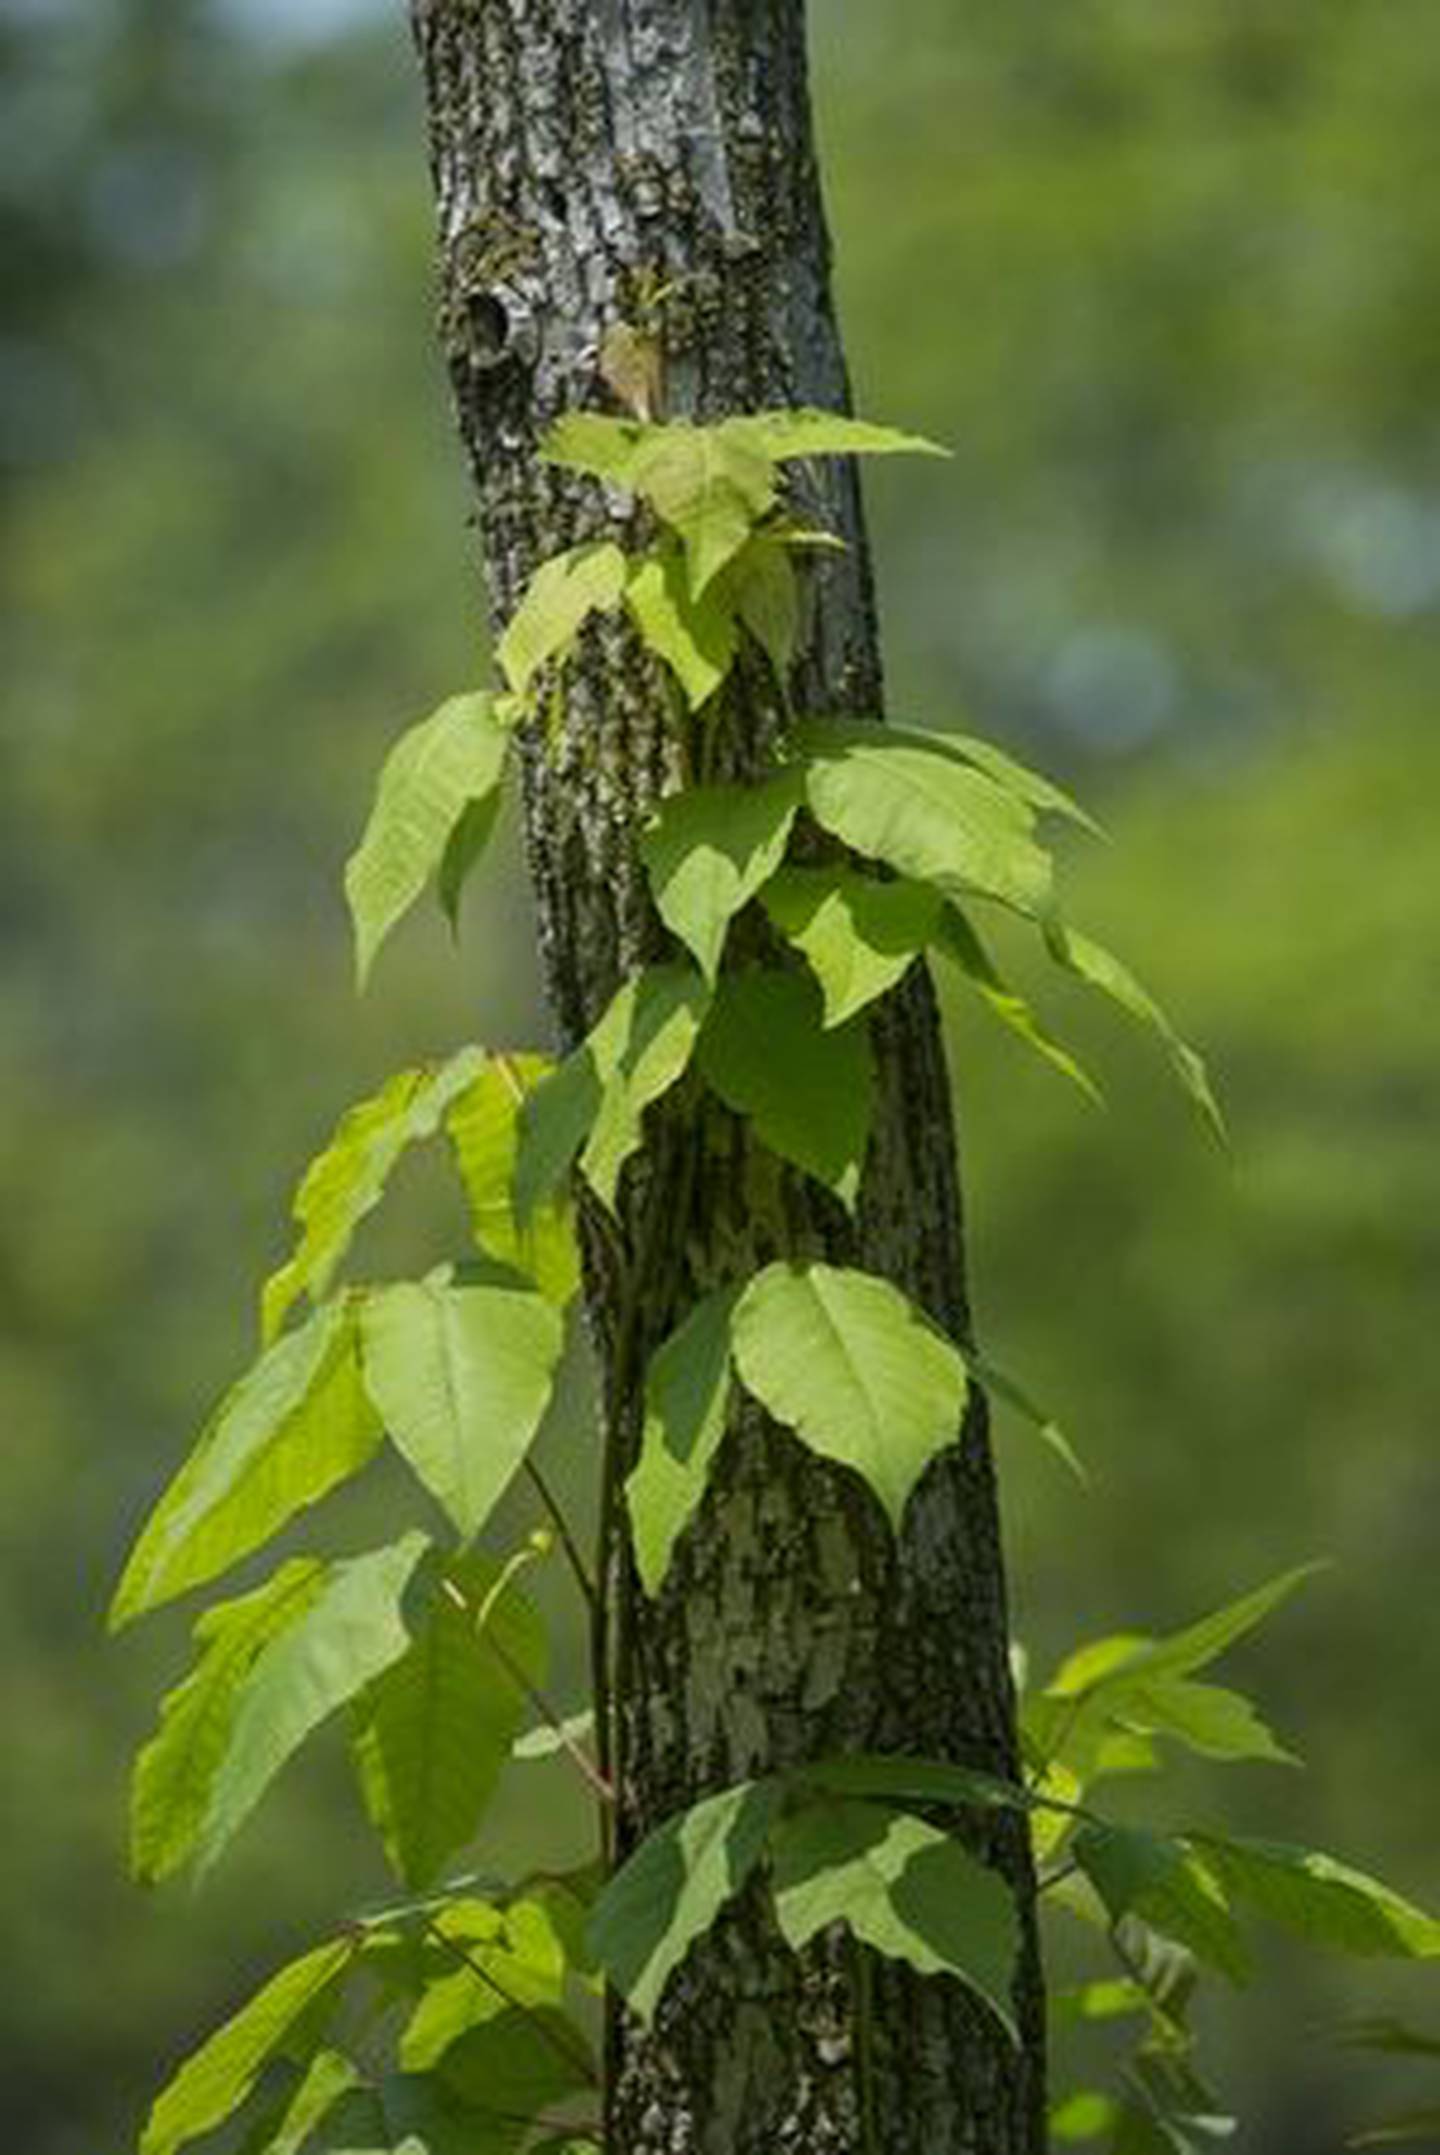 Let's all say it together: "Leaves of three, leave them be." Poison ivy can be tricky to eliminate from a landscape. If you find it, be sure to wear rubber gloves when removing it and dispose of the plant immediately.